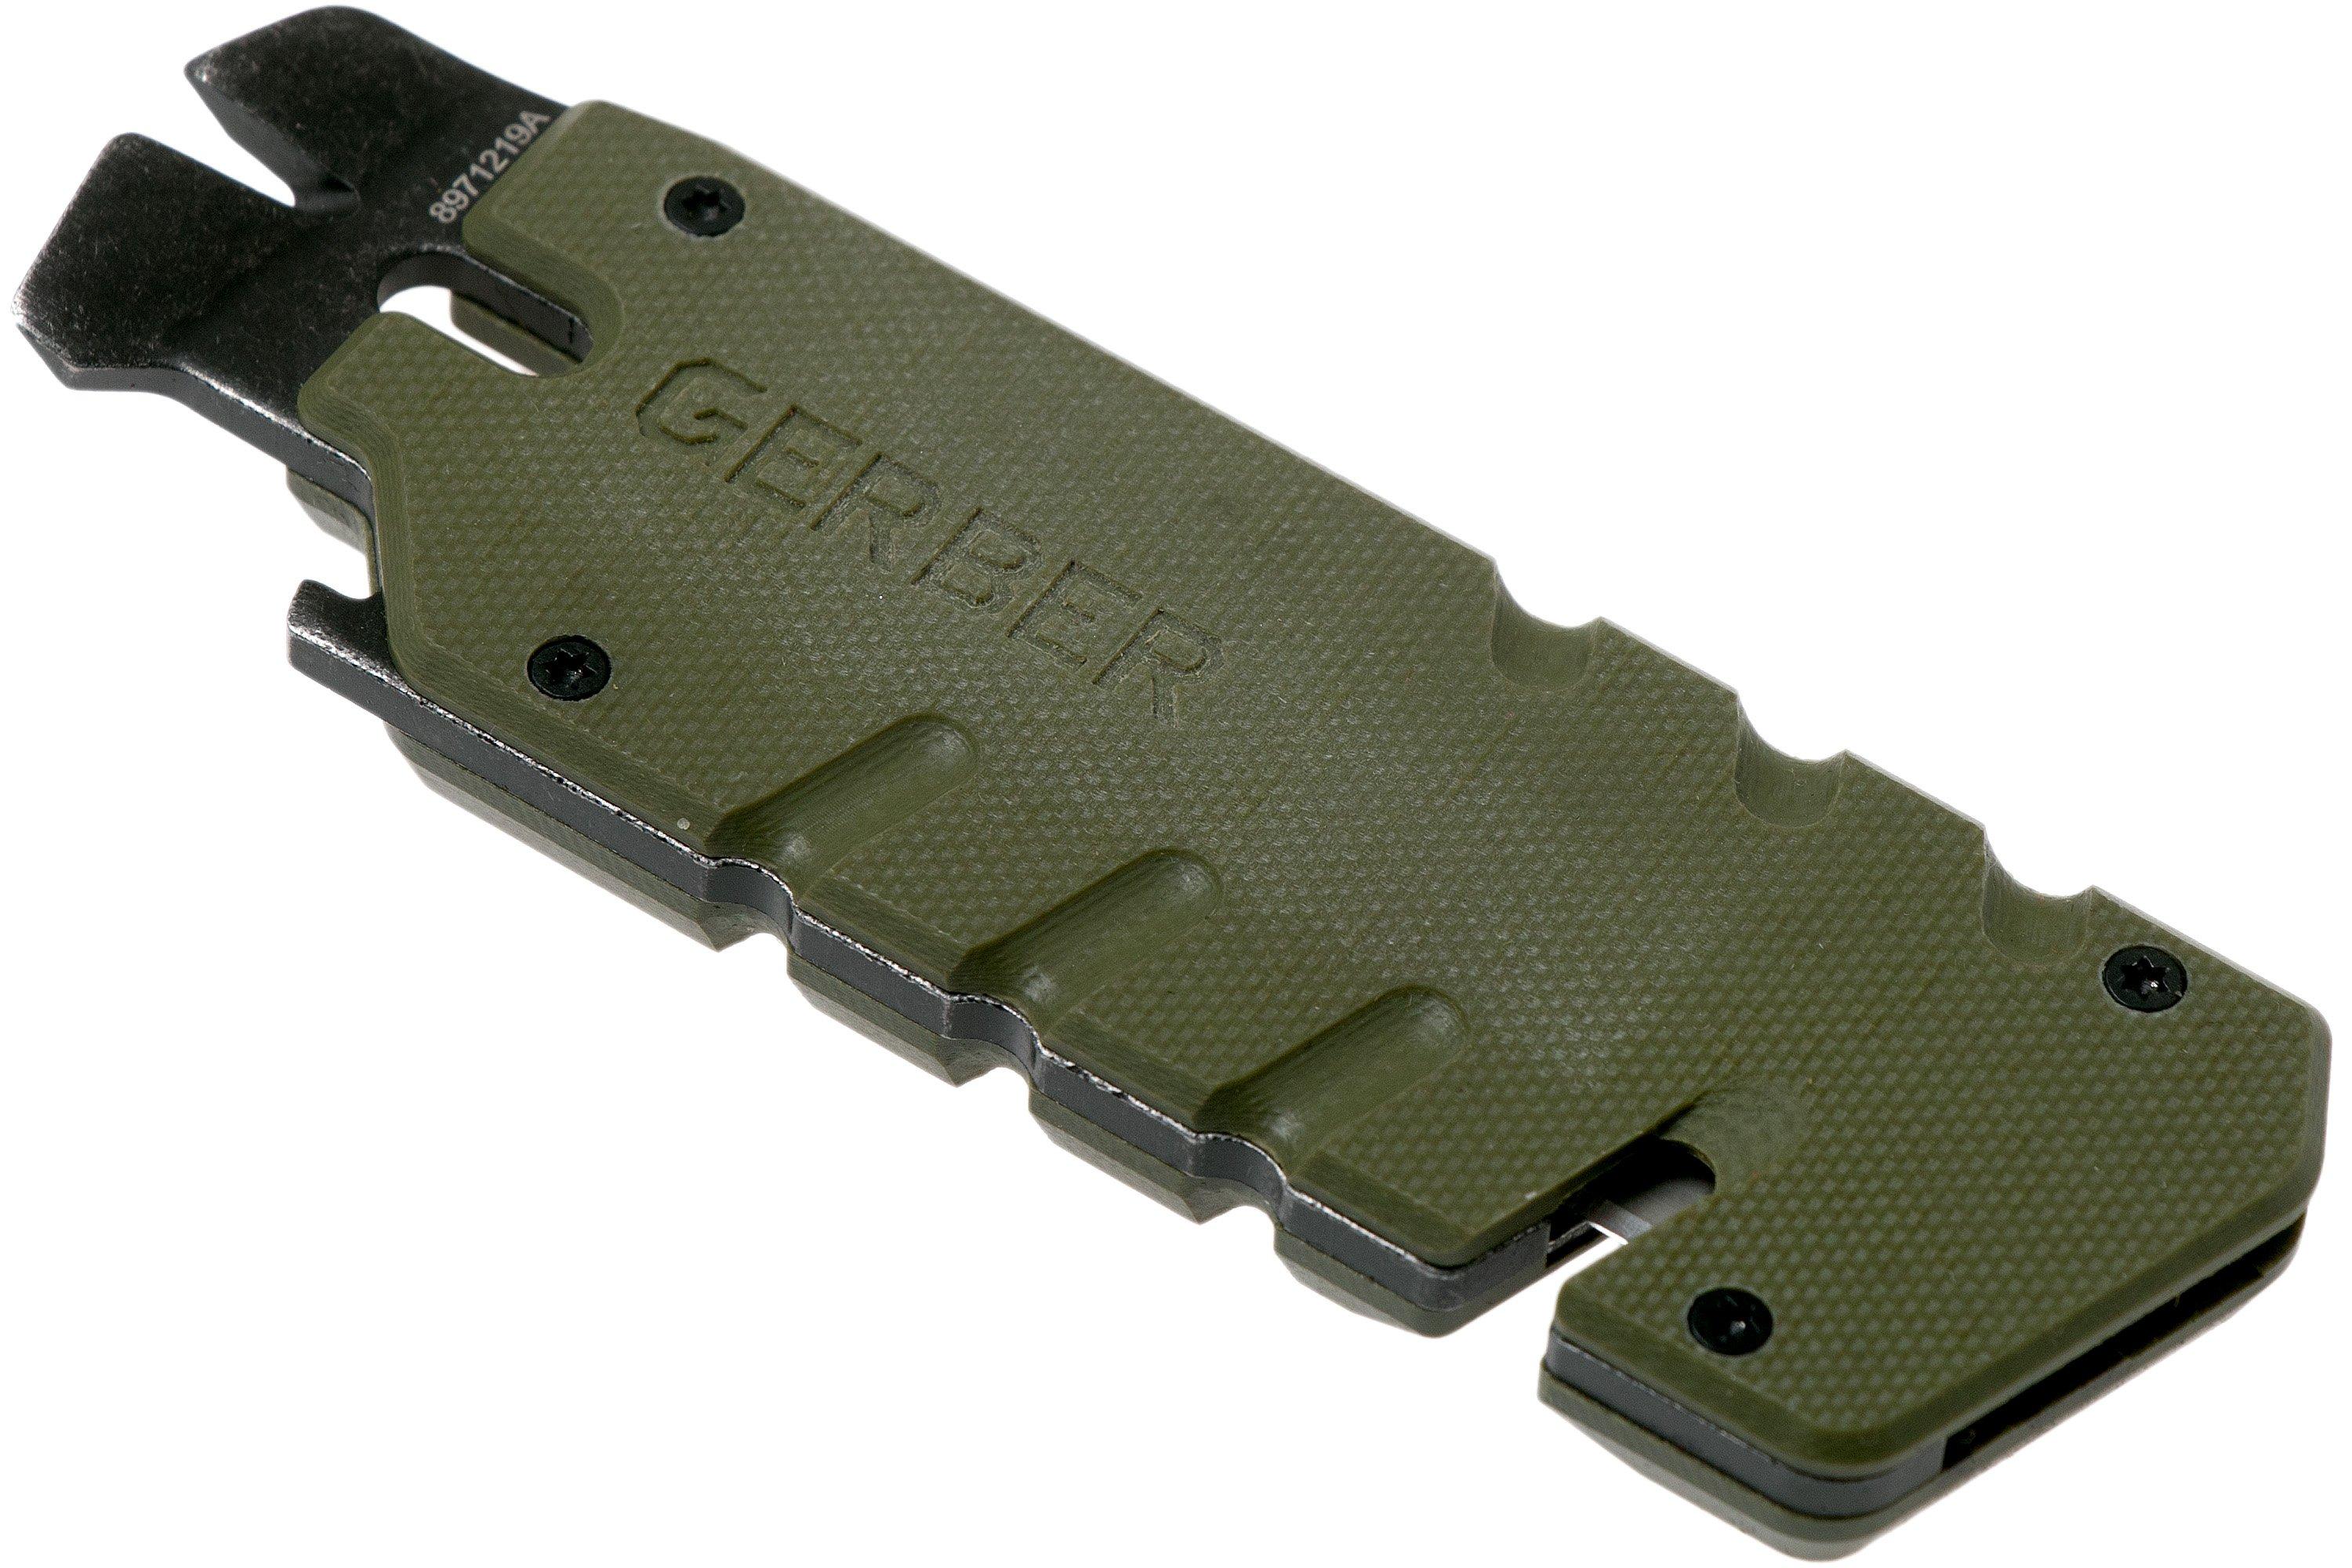 Gerber Gear Prybrid Utility Knife with Pry Bar - Multi-Tool Pocket Razor  Knife with Retractable Knife Blade - EDC Knife - Green 